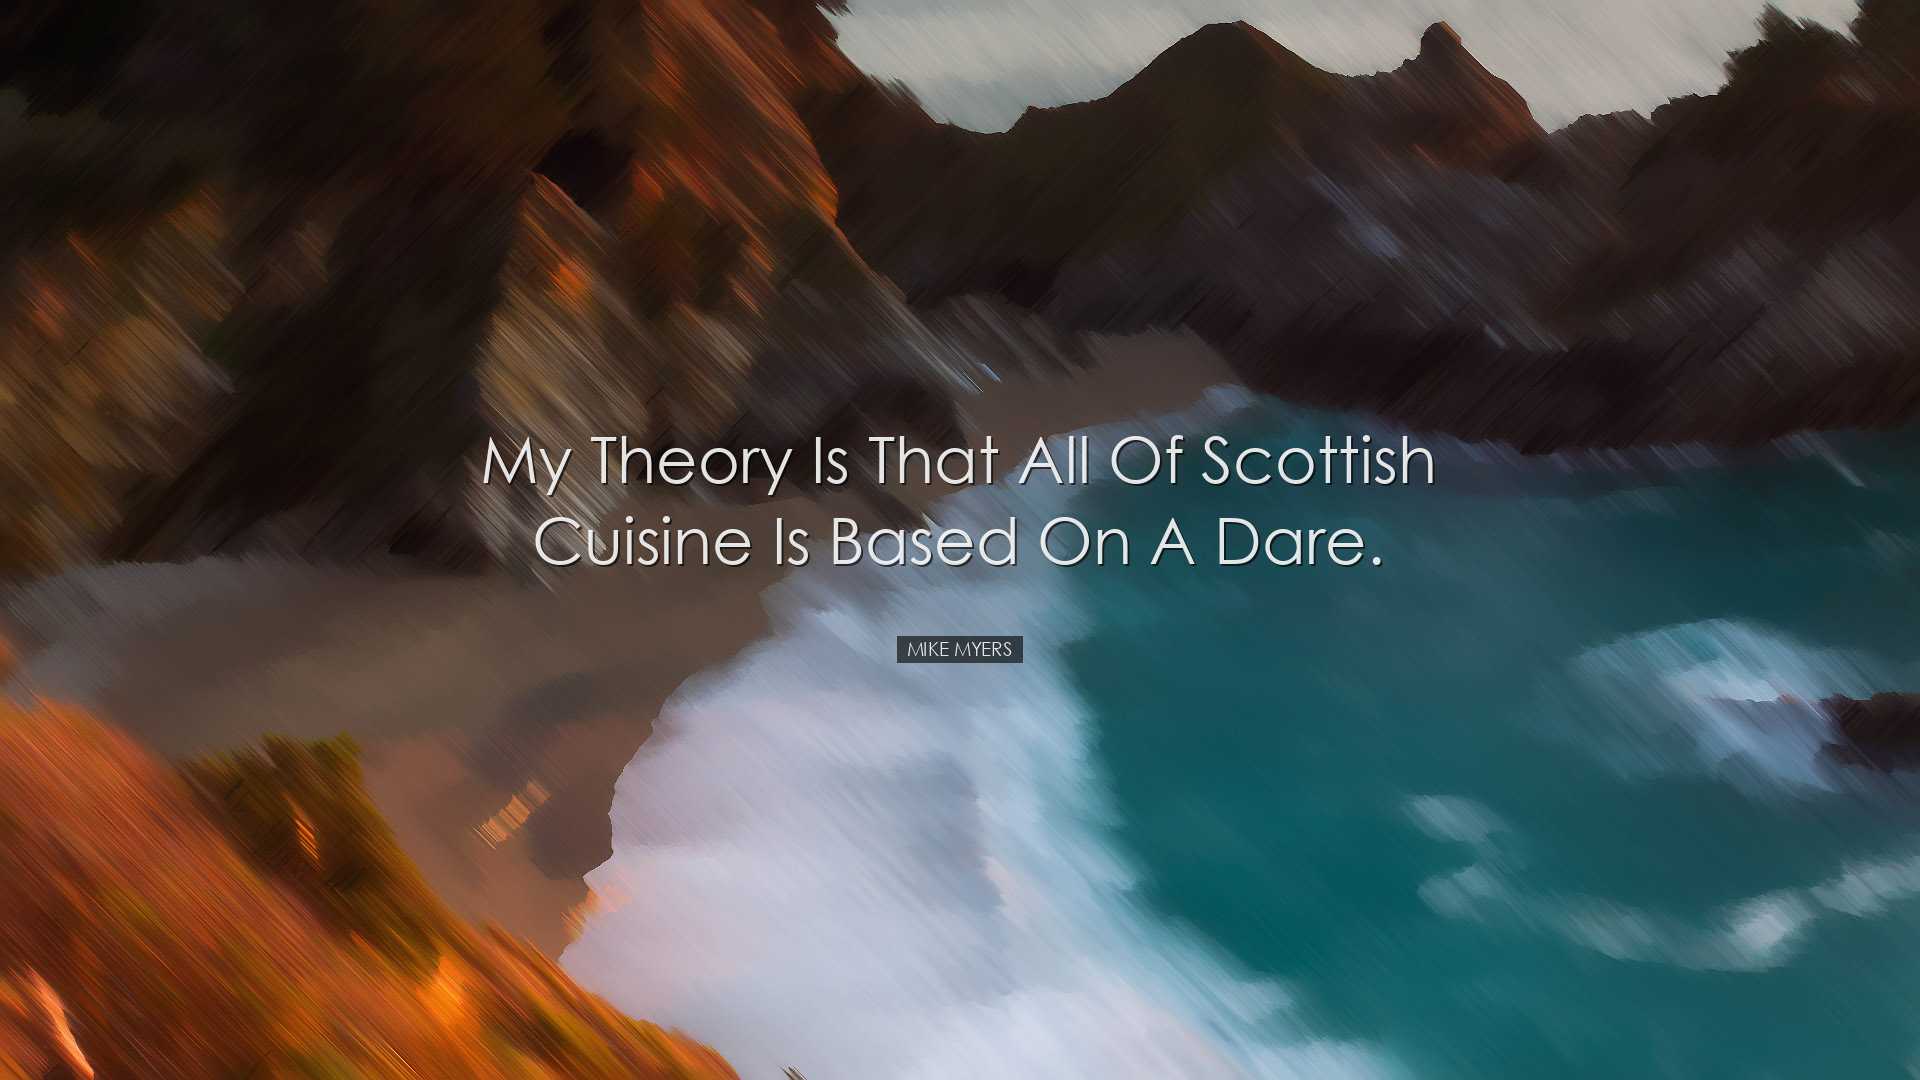 My theory is that all of Scottish cuisine is based on a dare. - Mi